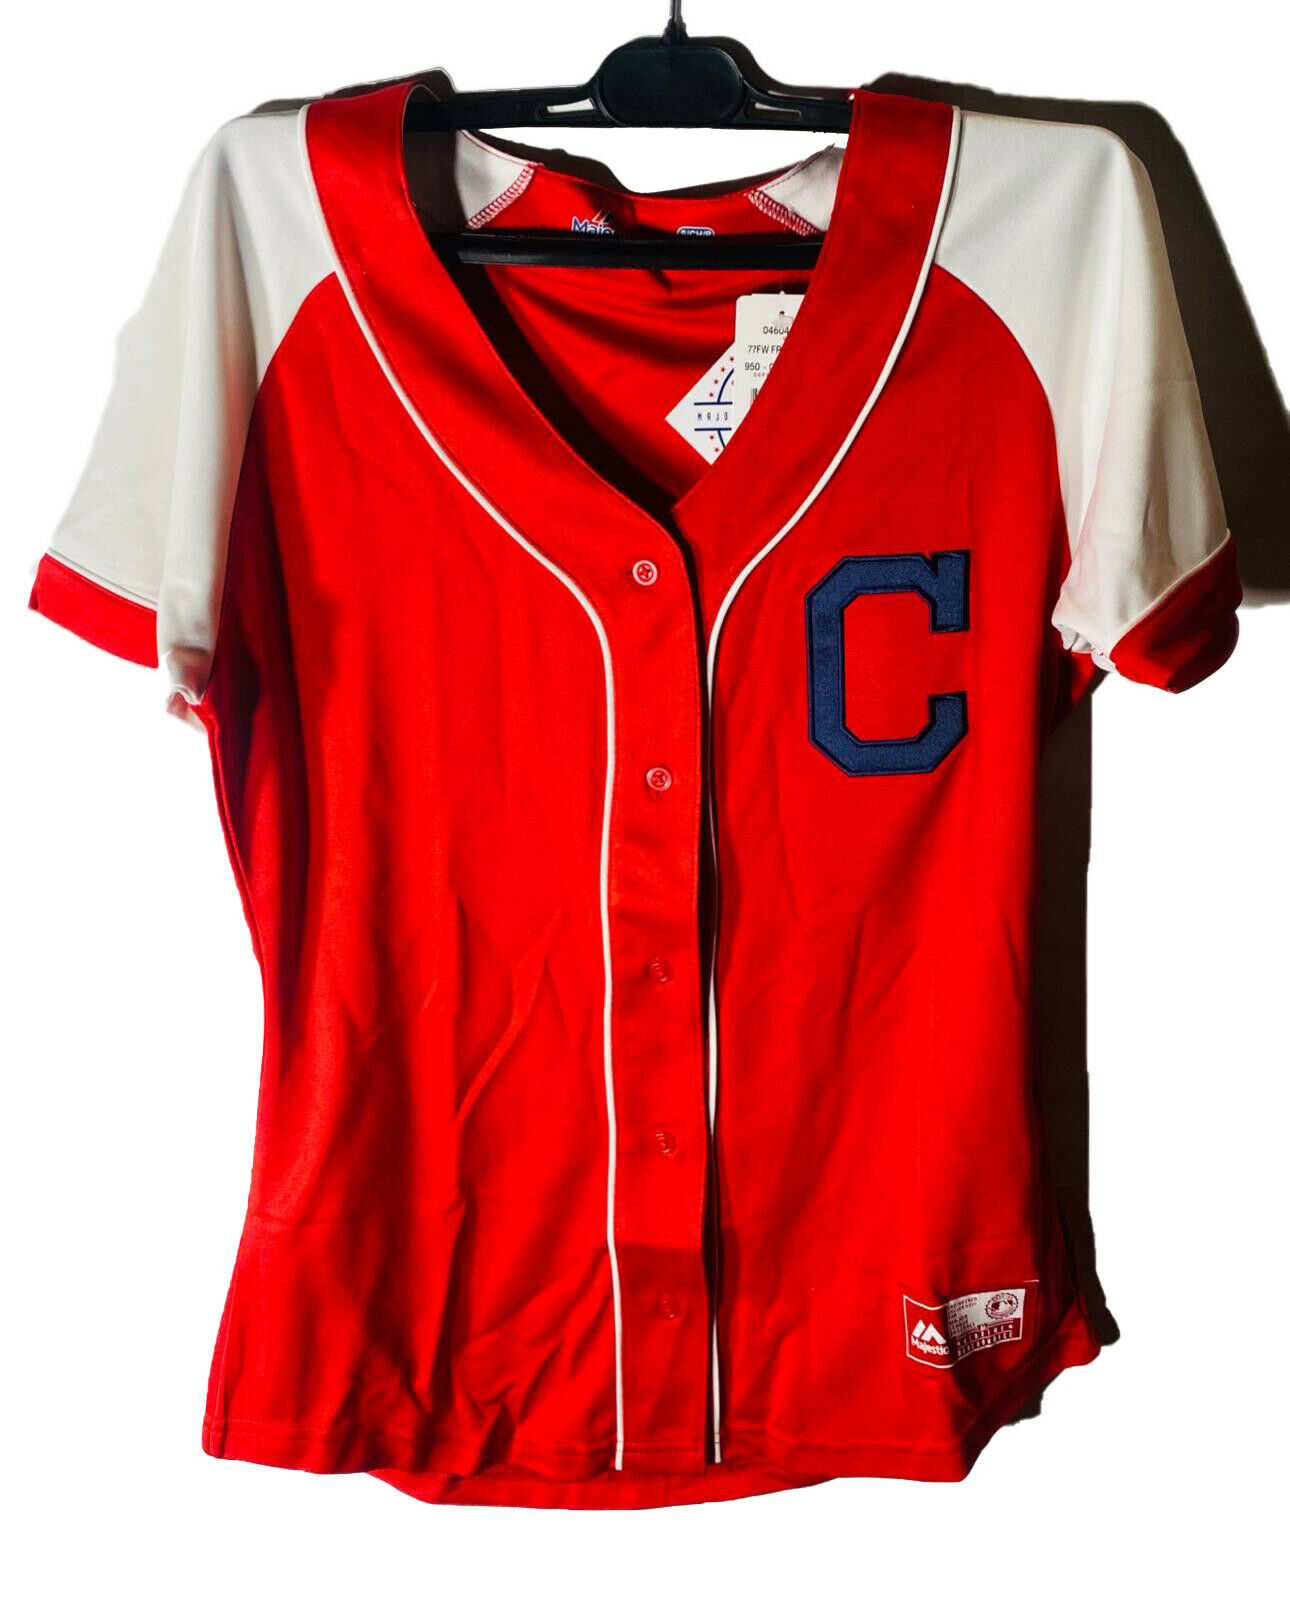 Majestic Athletic Women's Cleveland Indians Fashion Jersey Small - Red